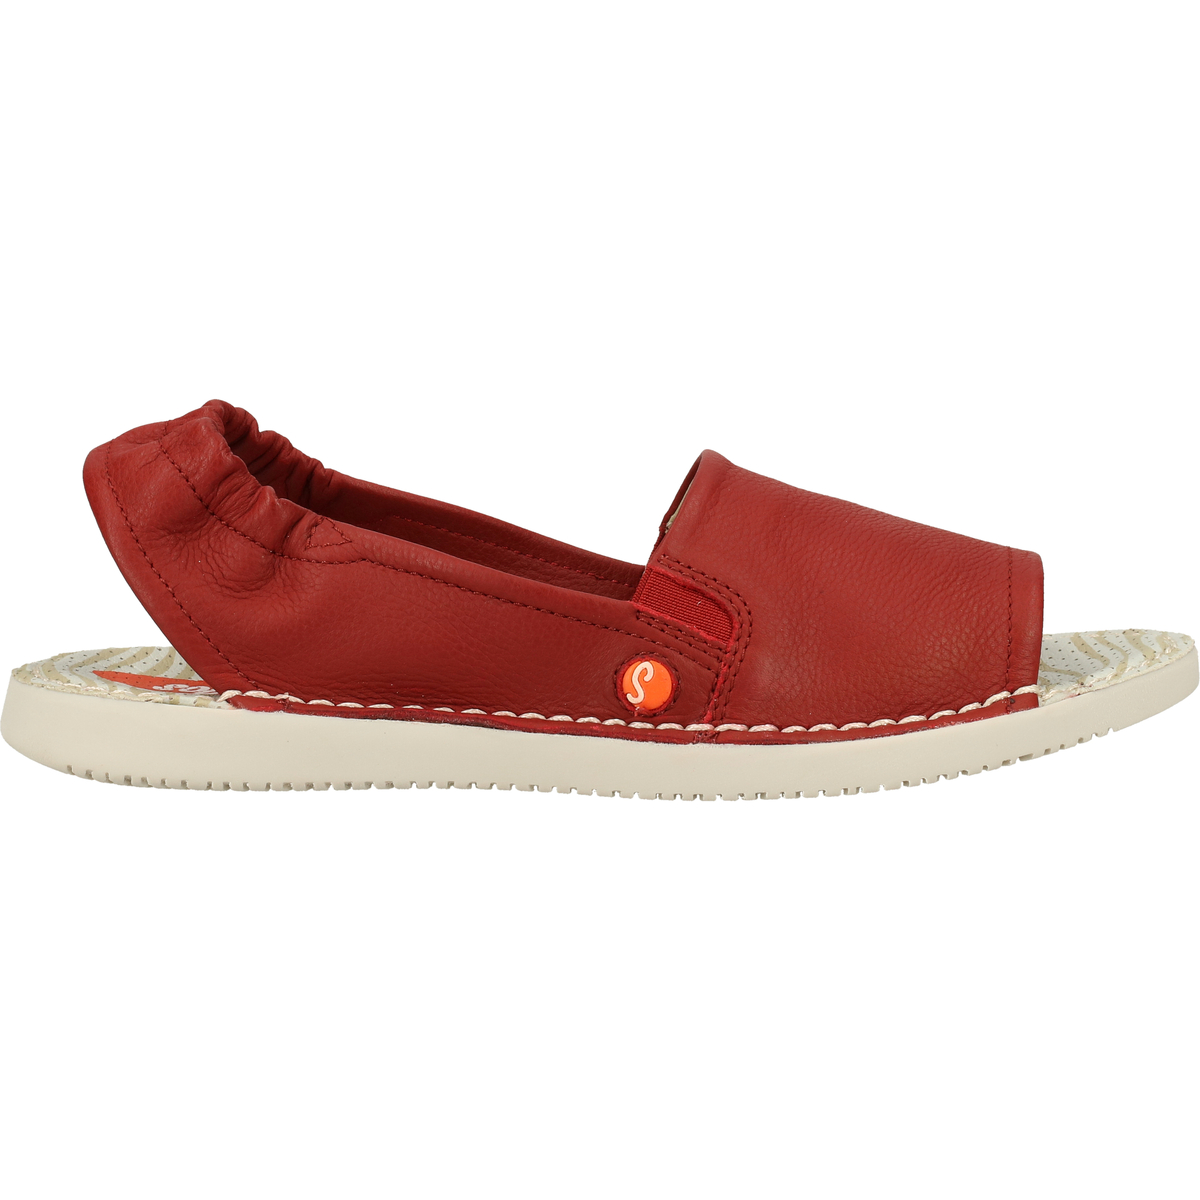 Chaussures Femme Sandales Top 3 Shoes Sandales Rouge